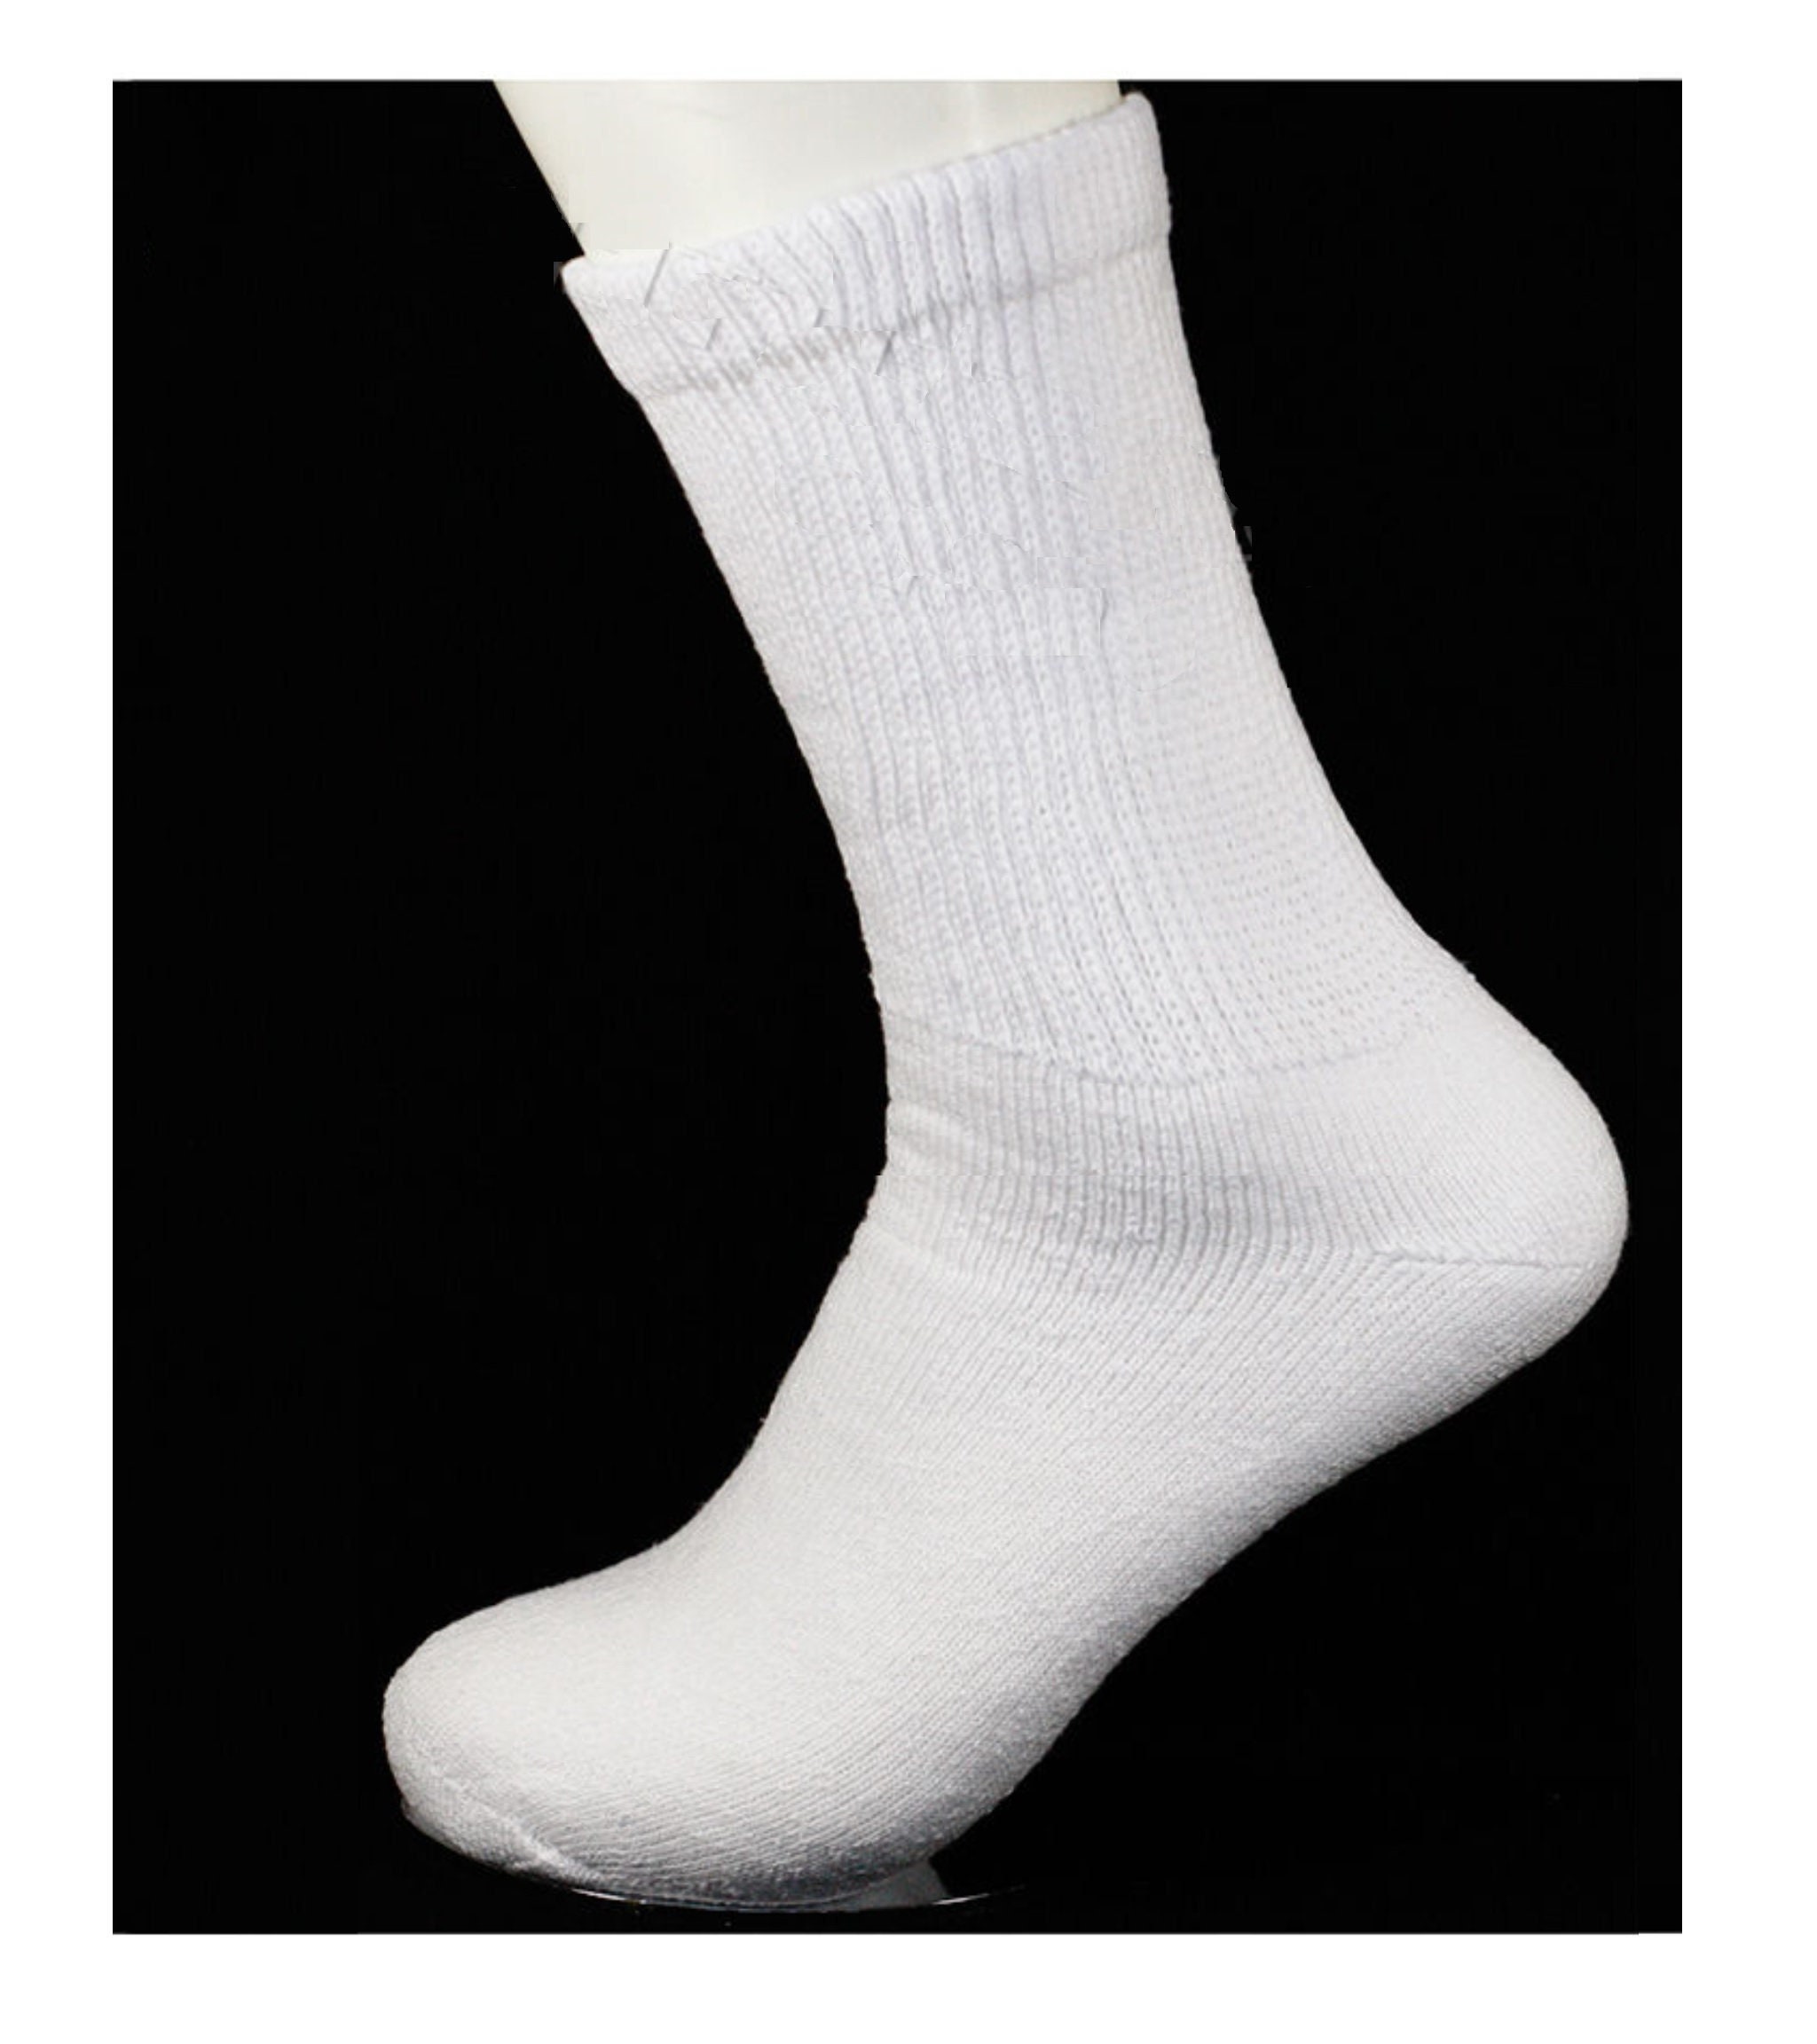 4 Pairs , 12 Pairs Heavy Weight Thick White Cotton Crew Socks Men Woman  Teen for Work, Sports, Everyday Wear Size 9-11, 10-13, 13-15 -  Canada